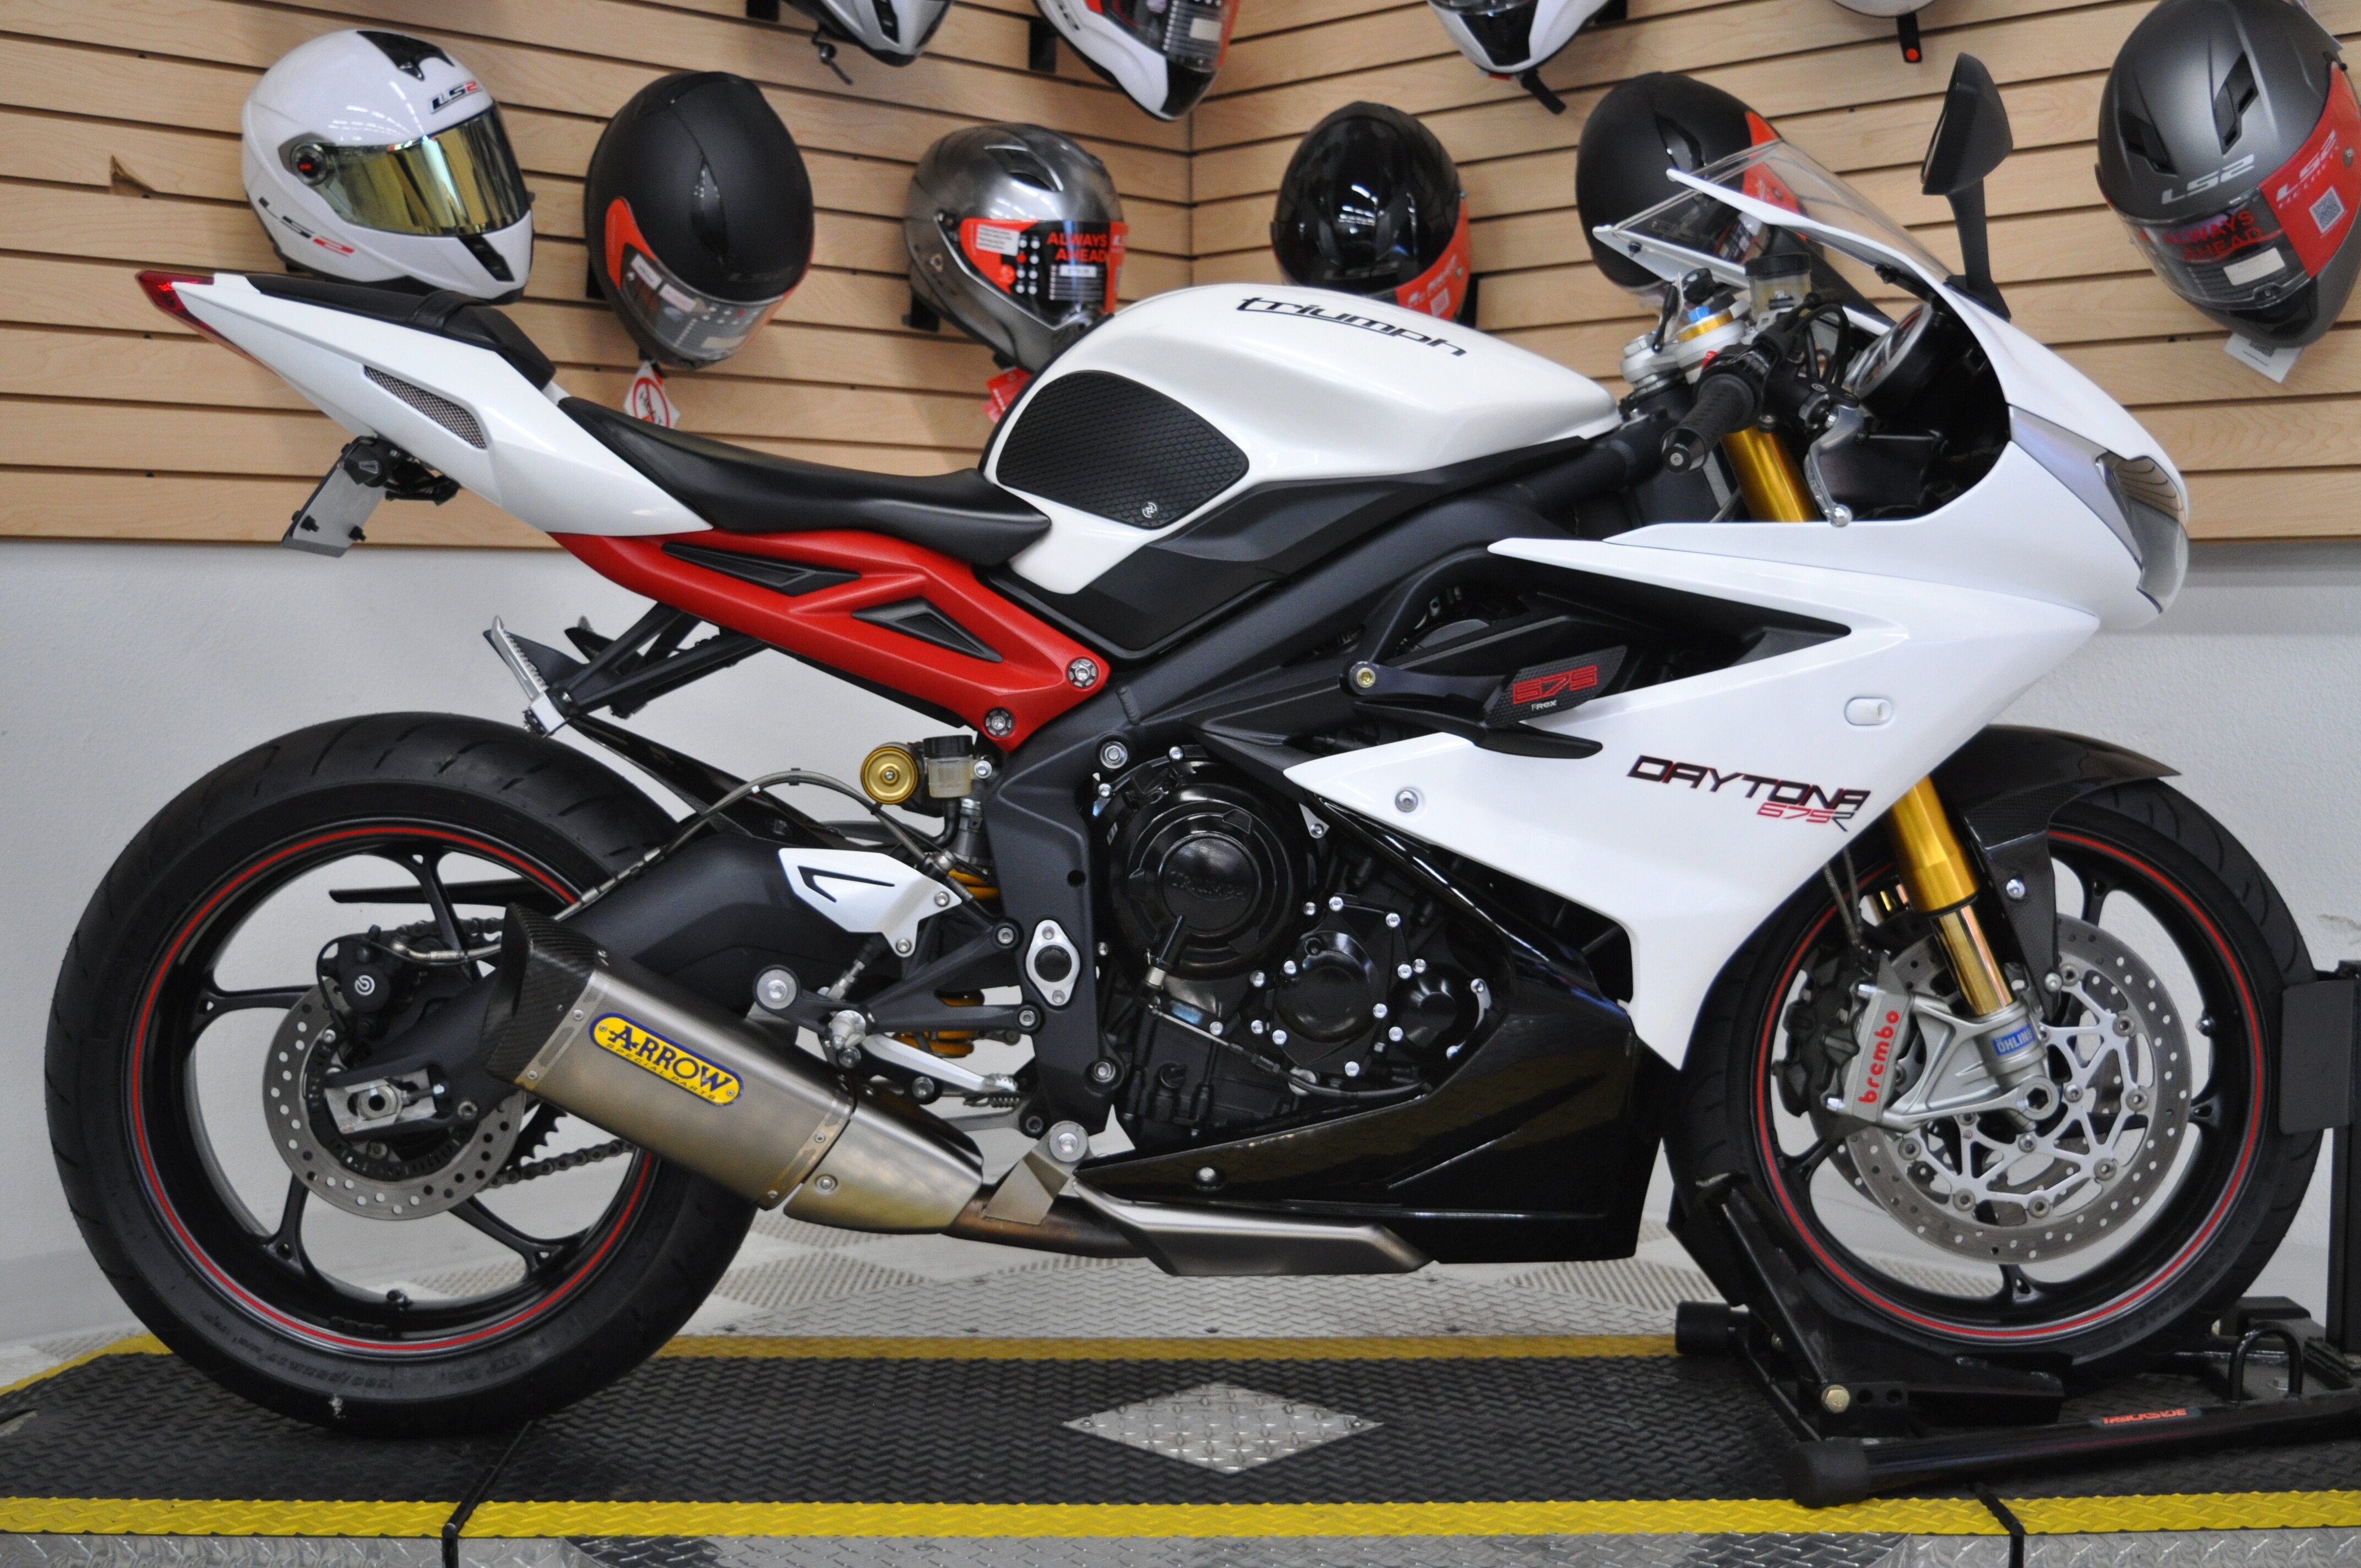 13 Triumph Daytona 675r Motorcycles For Sale Motorcycles On Autotrader